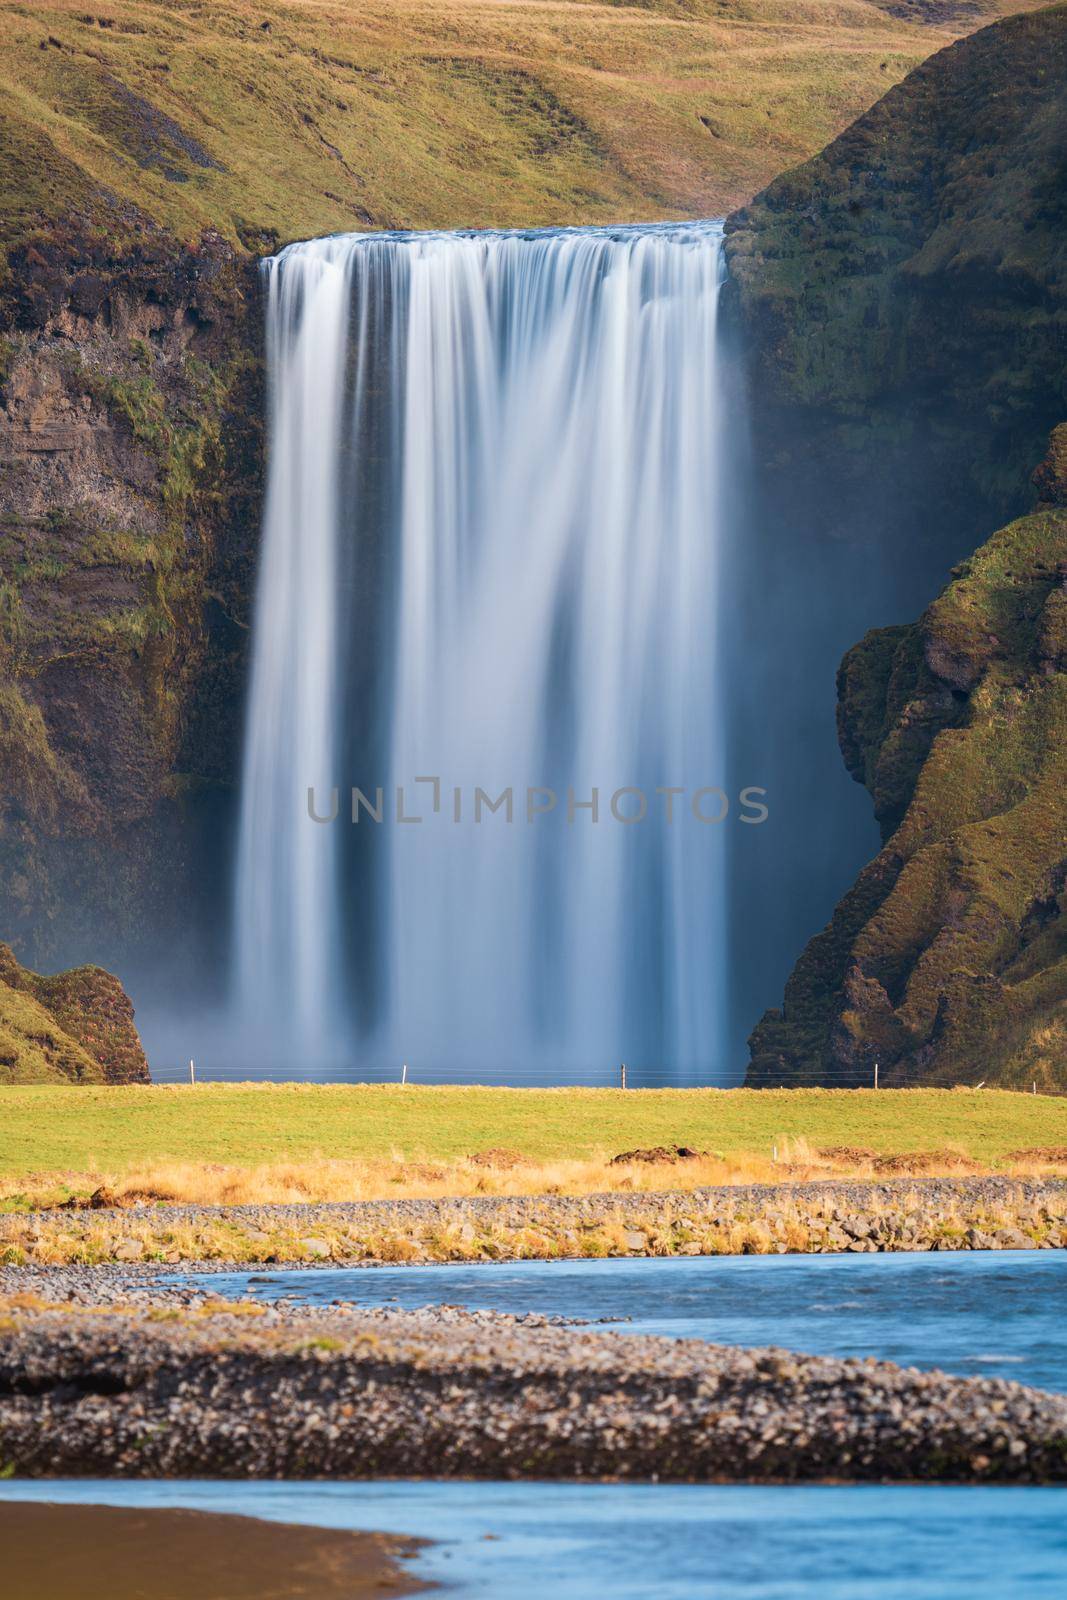 Long exposure of famous Skogafoss waterfall in Iceland from the distance with nobody